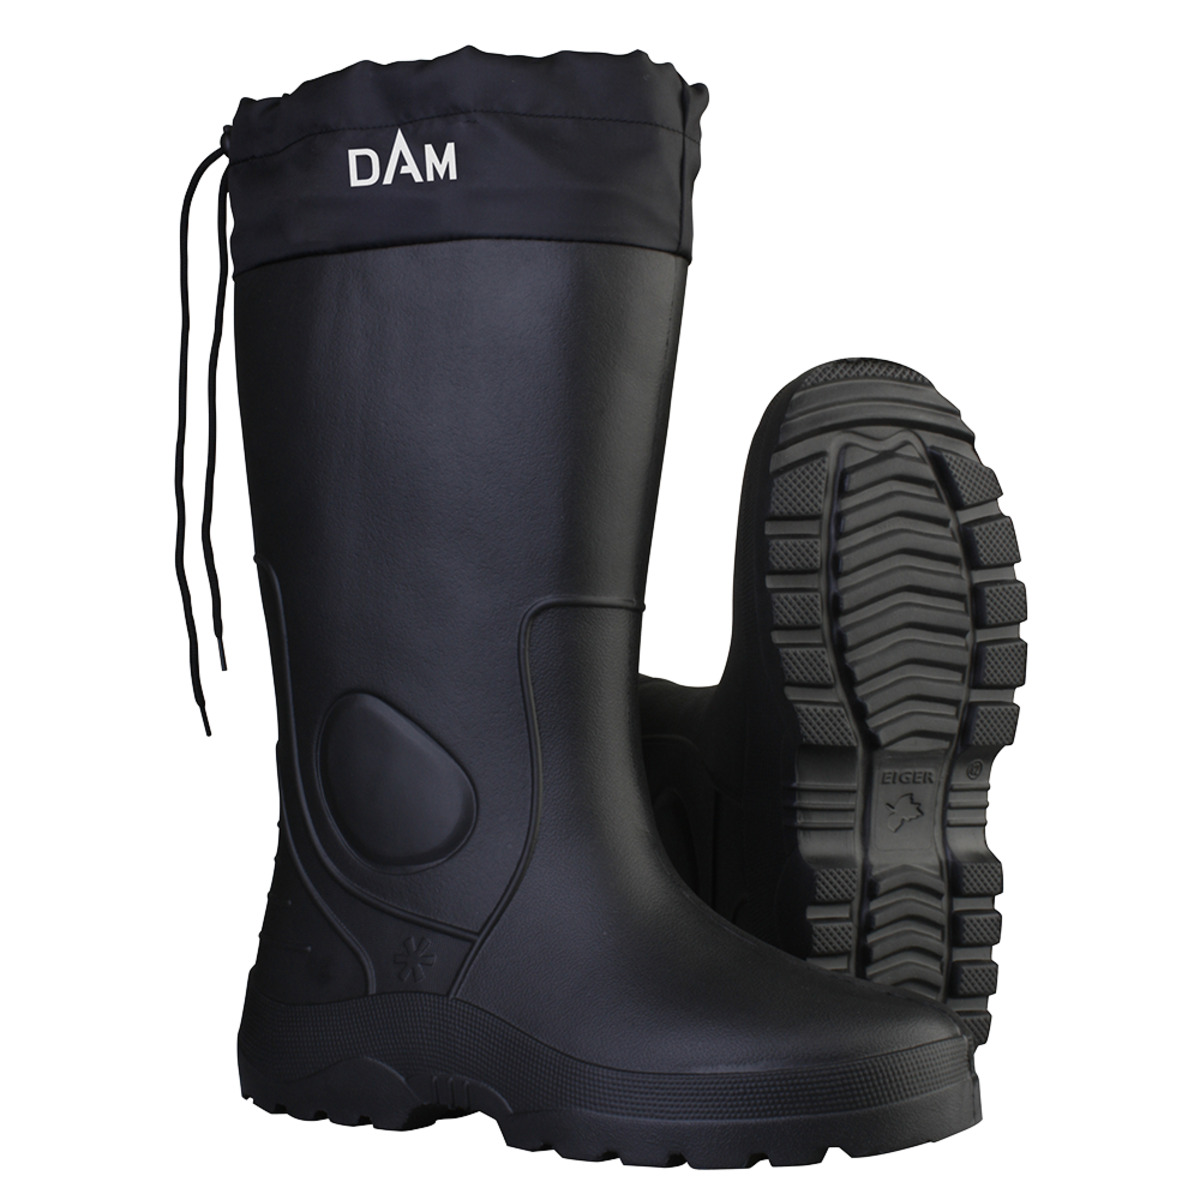 Dam Lapland Thermo Boots - 47/12 BLACK